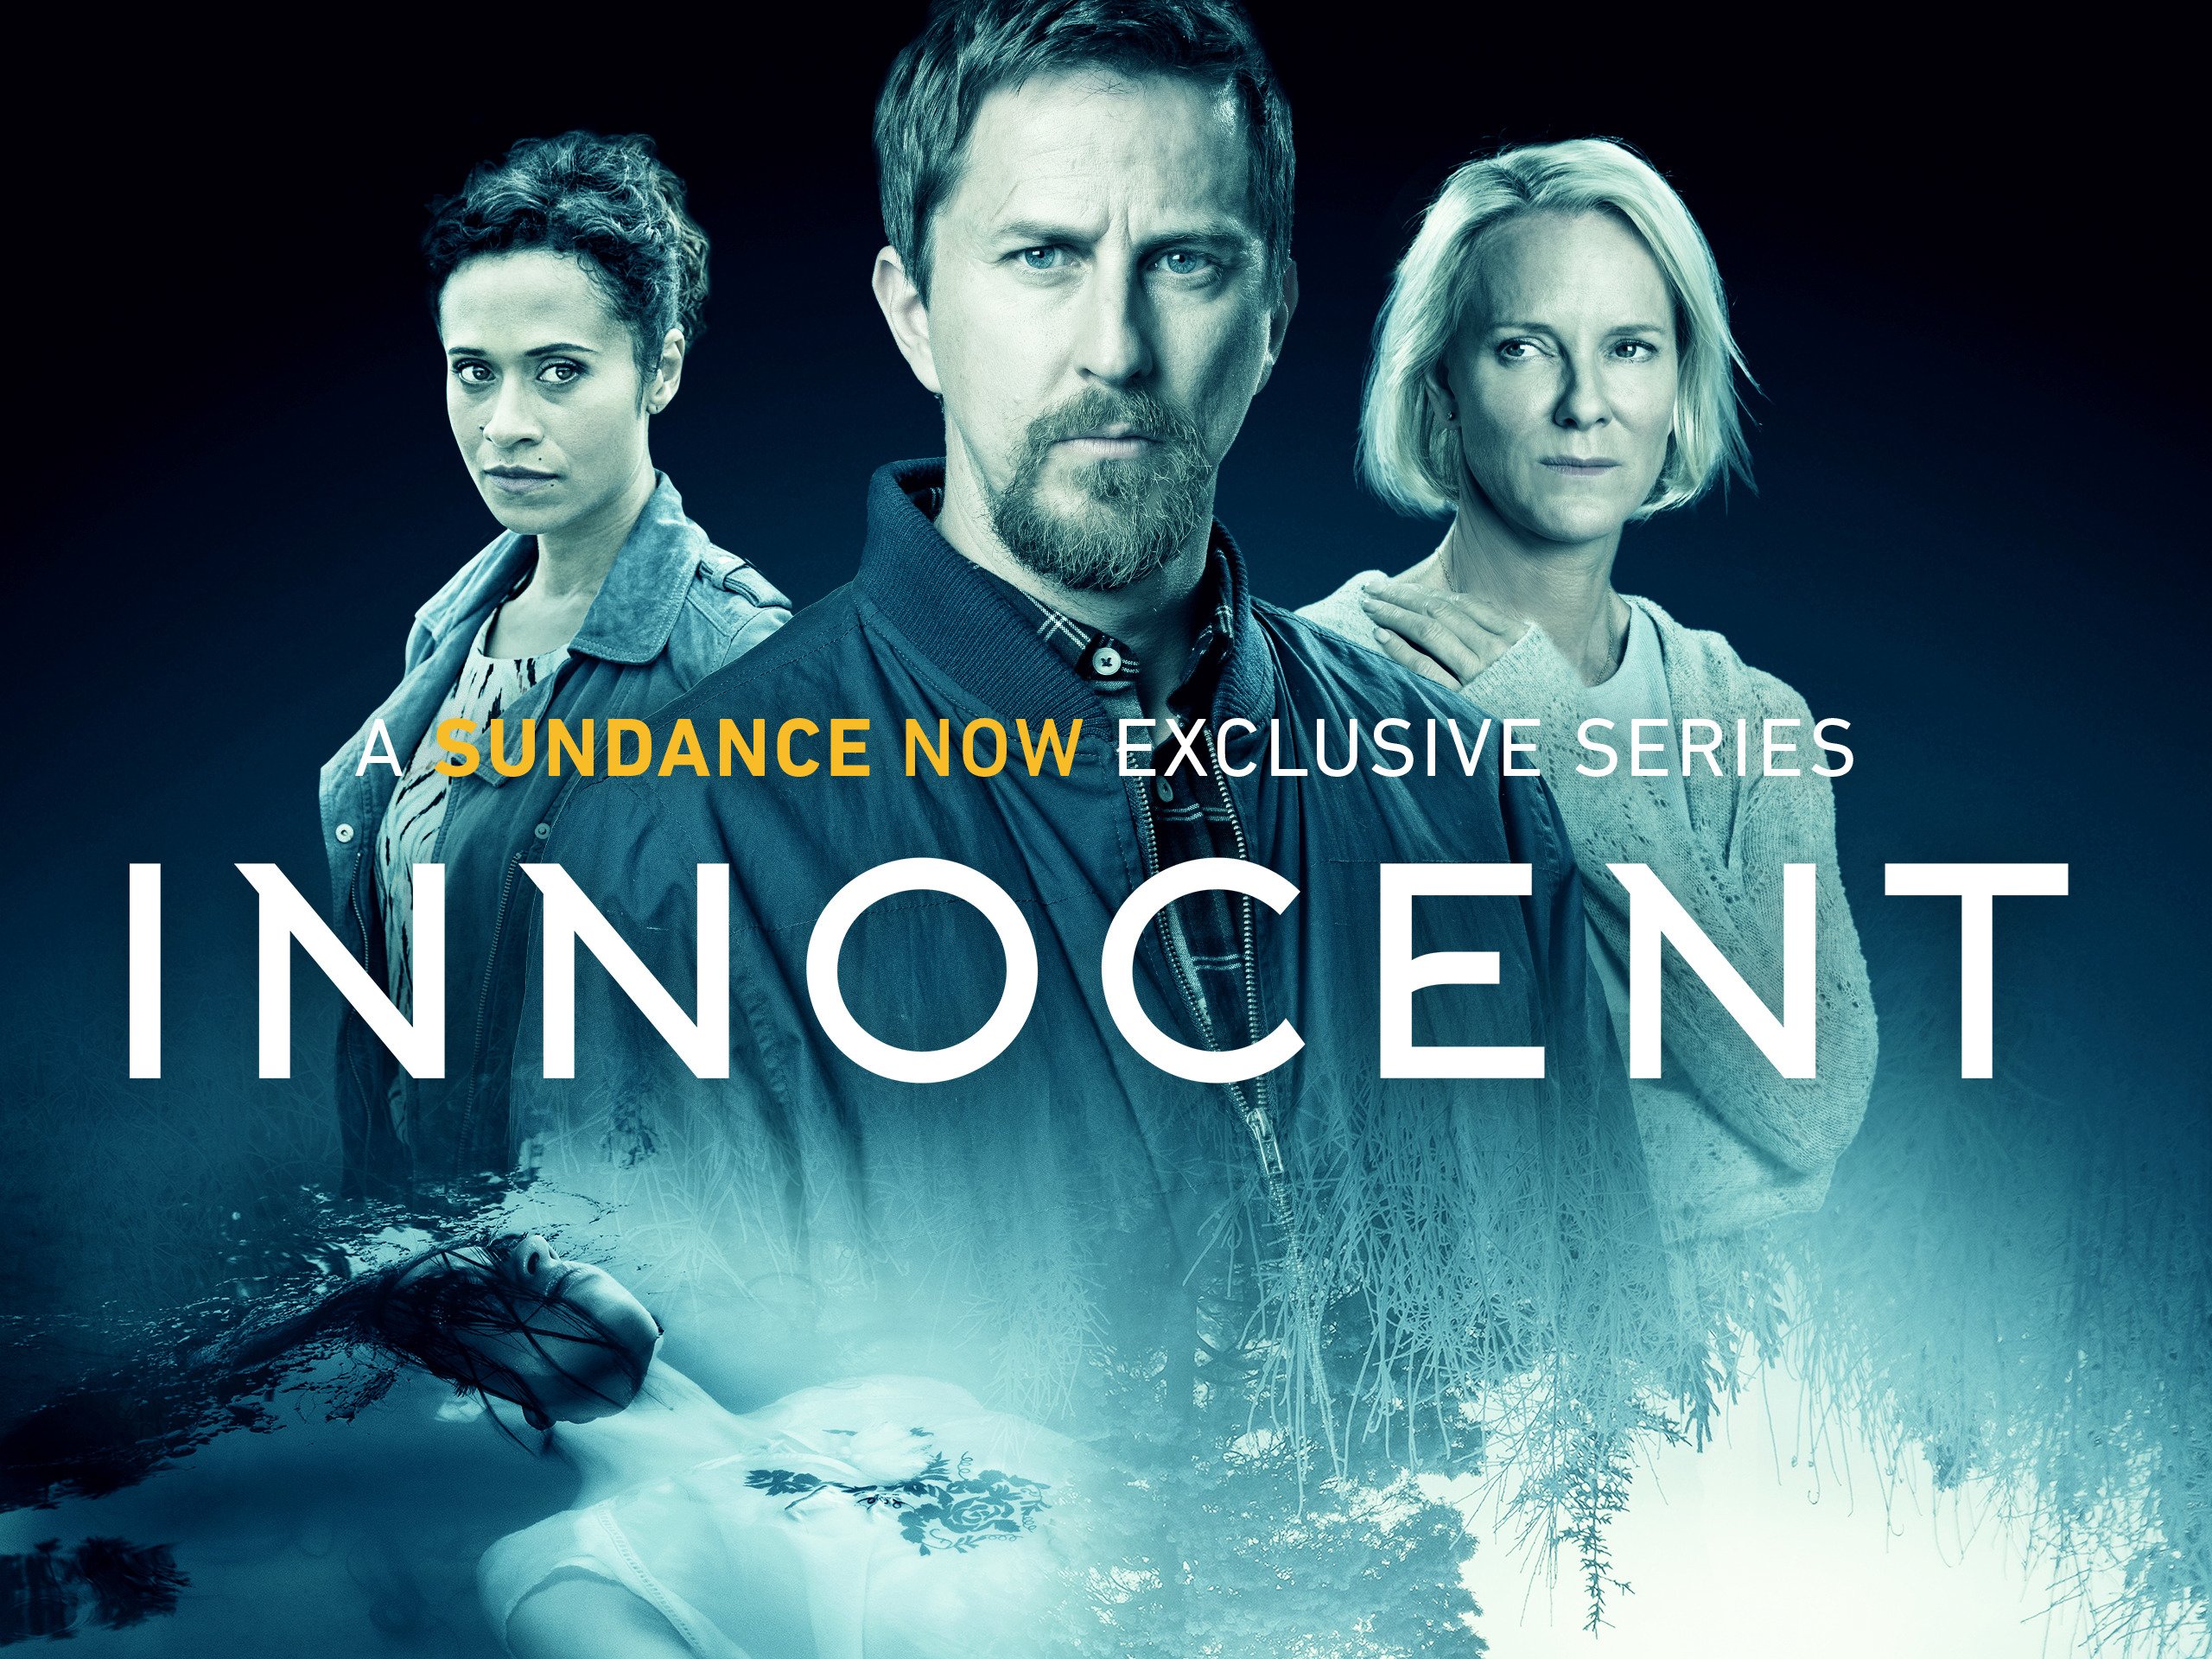 Innocent Season 2 Release Date, Premise, Cast and much more.